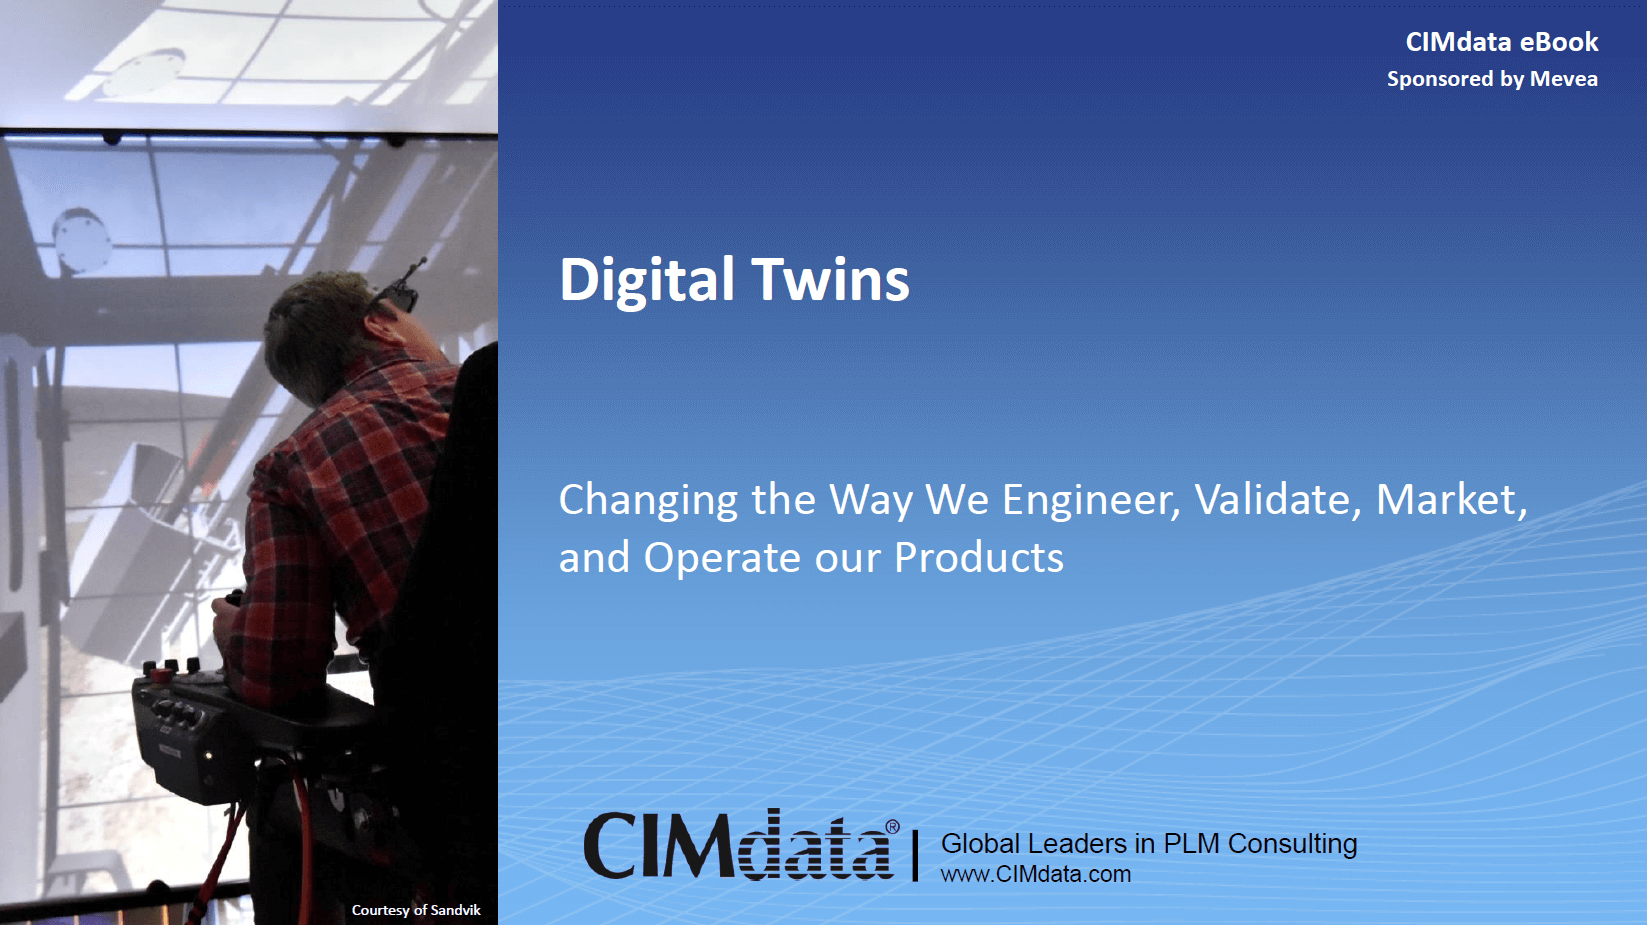 Digital Twins: Changing the Way We Engineer, Validate, Market, and Operate Our Products